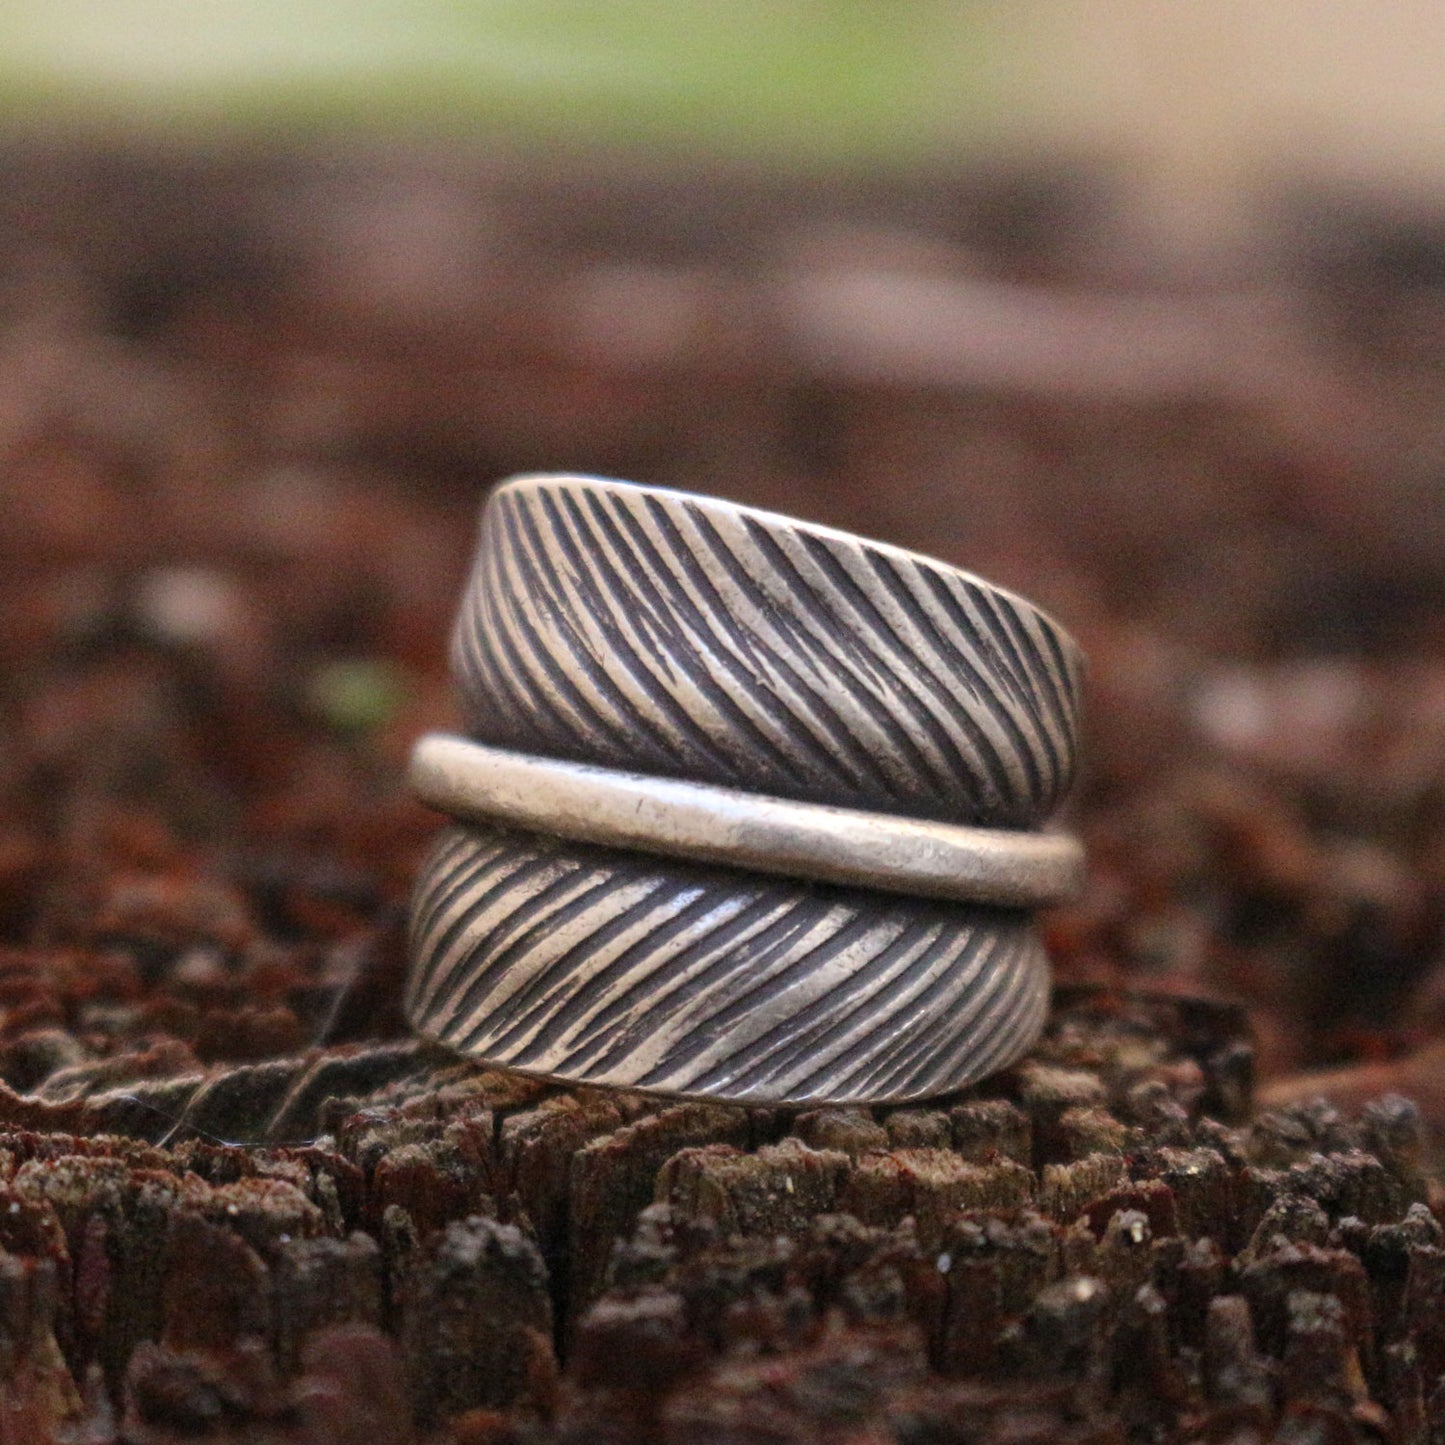 Etched Sterling Feather Ring